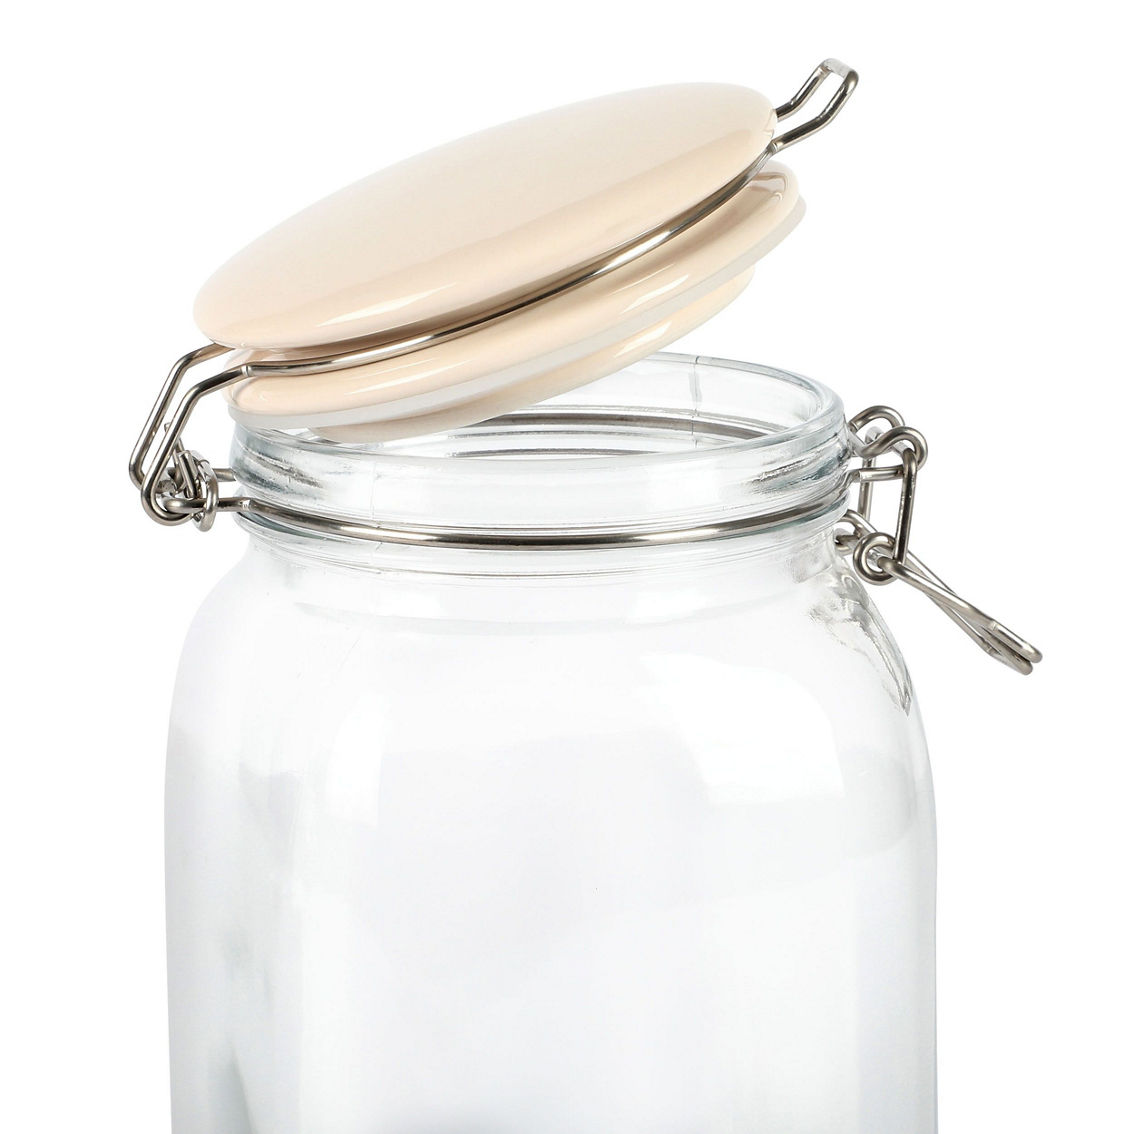 Martha Stewart Rindleton 3 Piece Glass Canister Set with Ceramic Lids in Off-Whi - Image 4 of 5